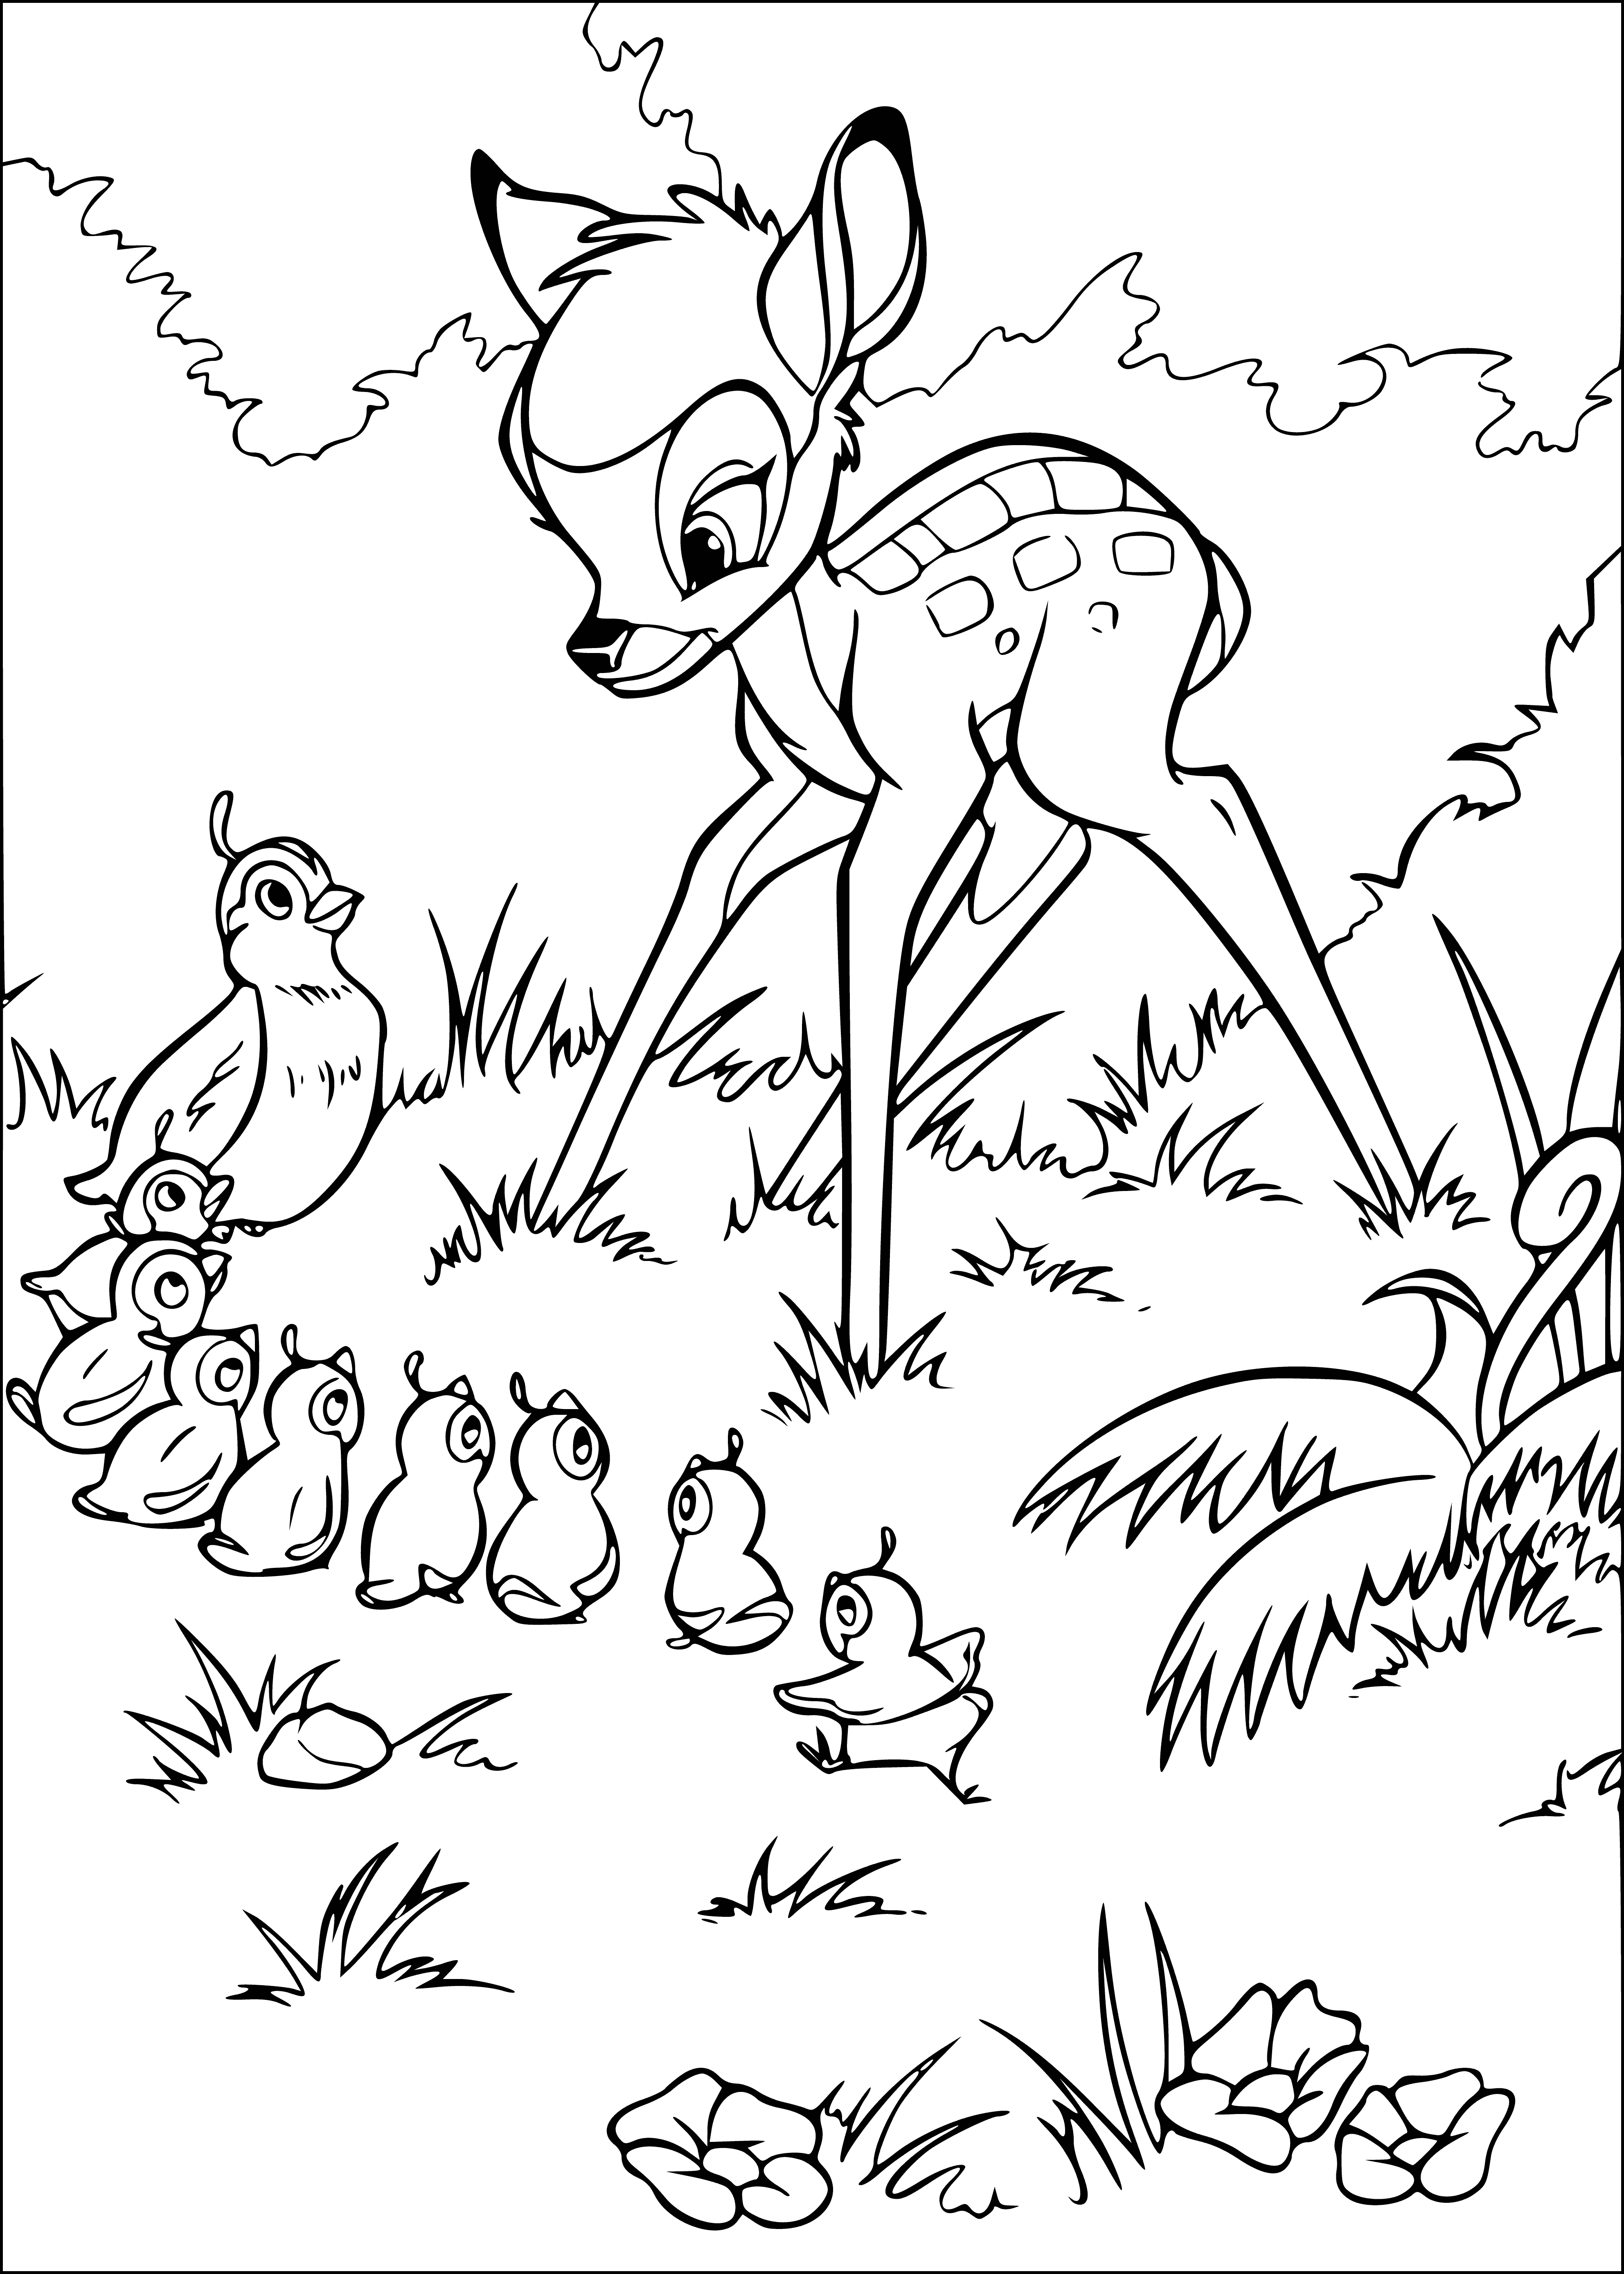 Bambi and the birds coloring page